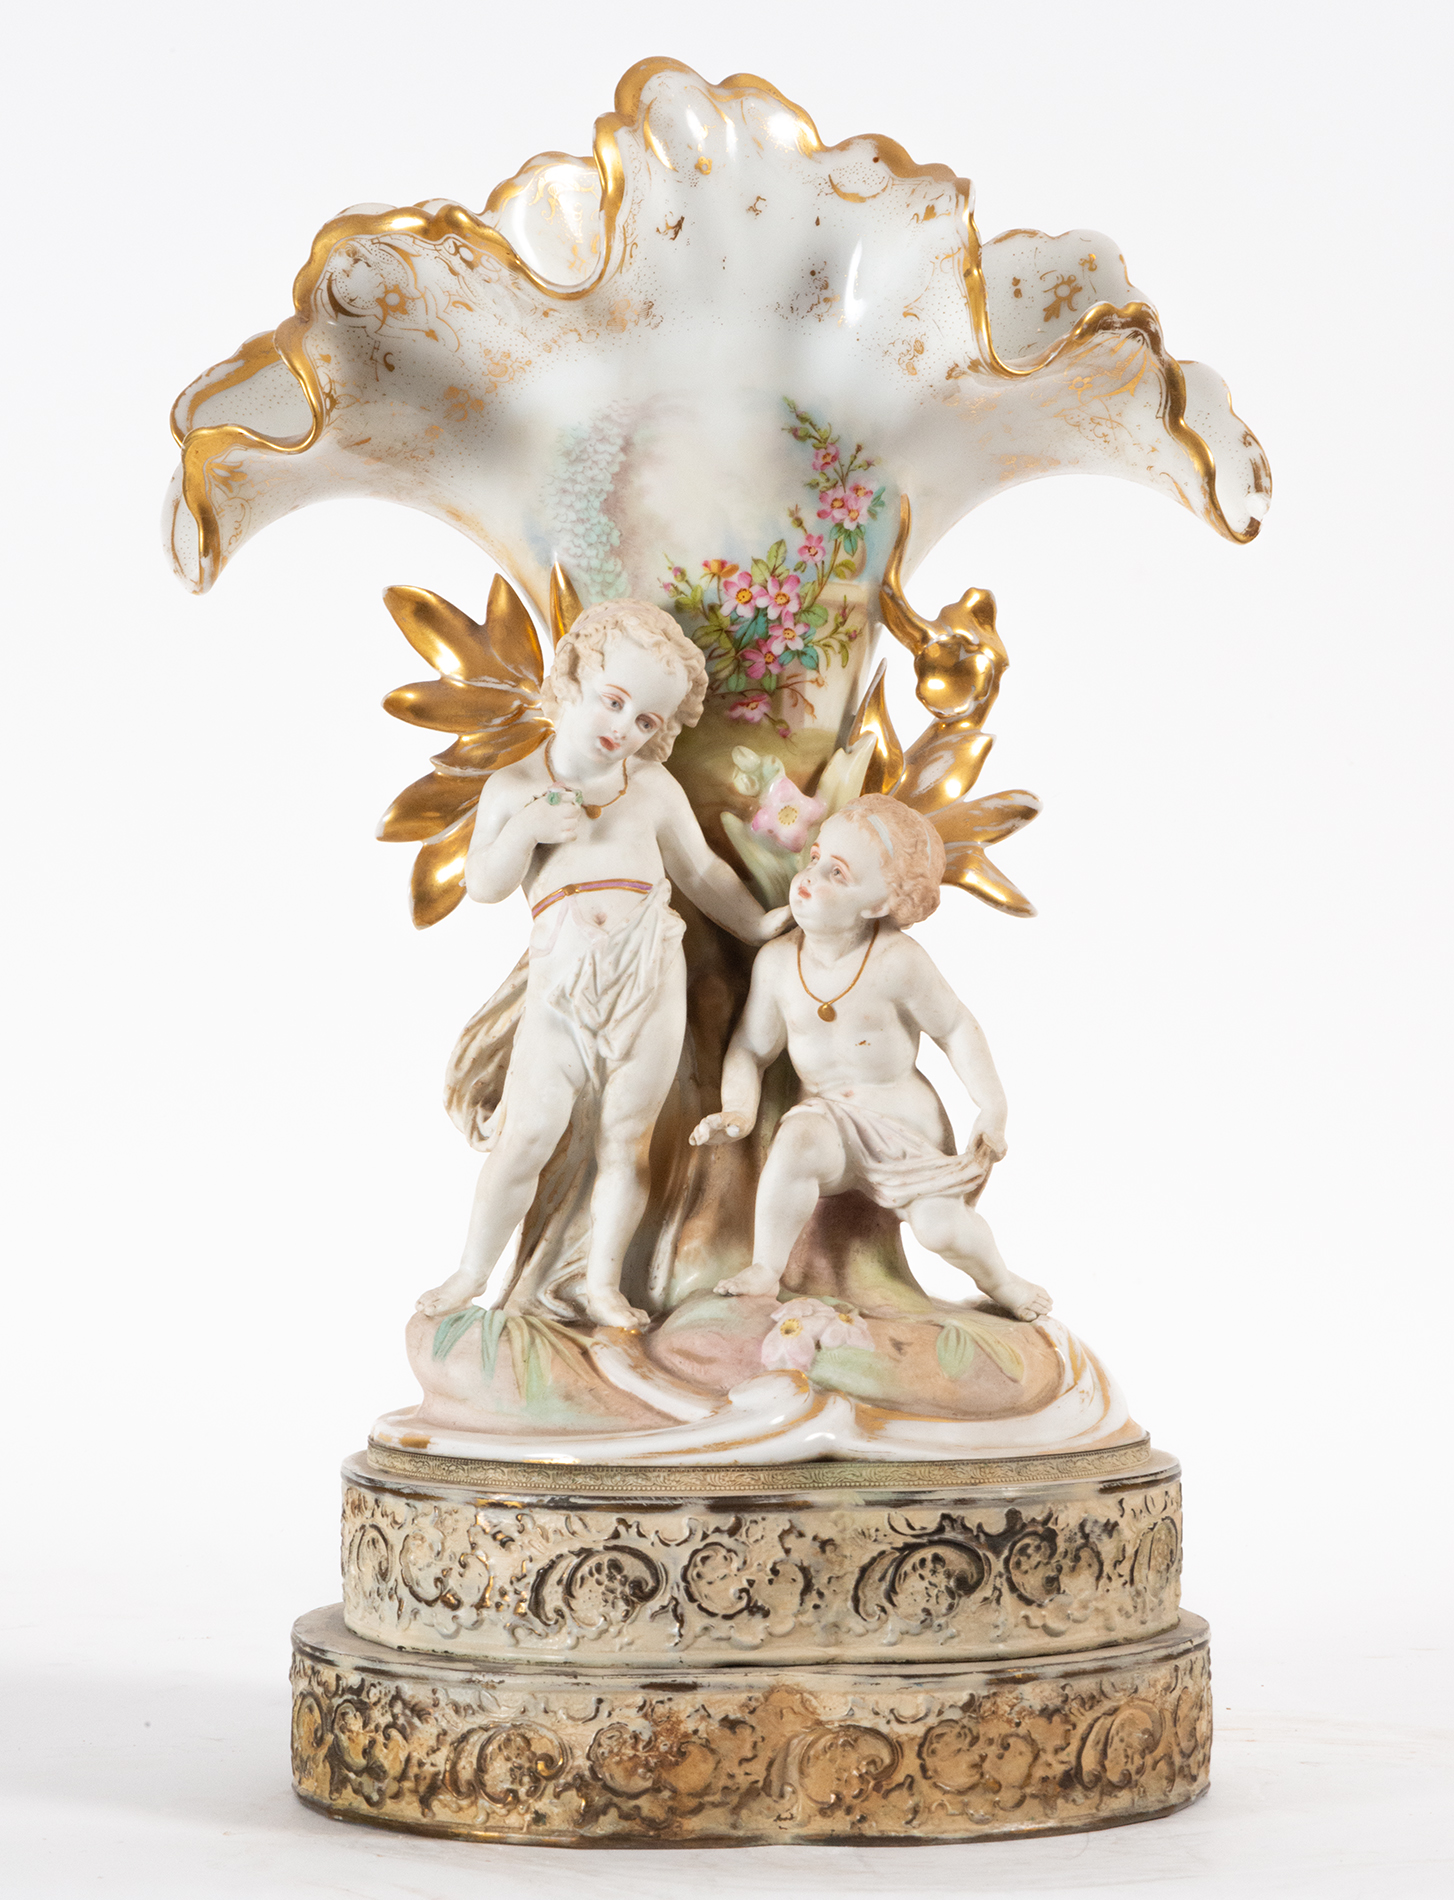 Pair of Vases with Little Shepherds in glazed biscuit porcelain, 19th century - Image 6 of 8